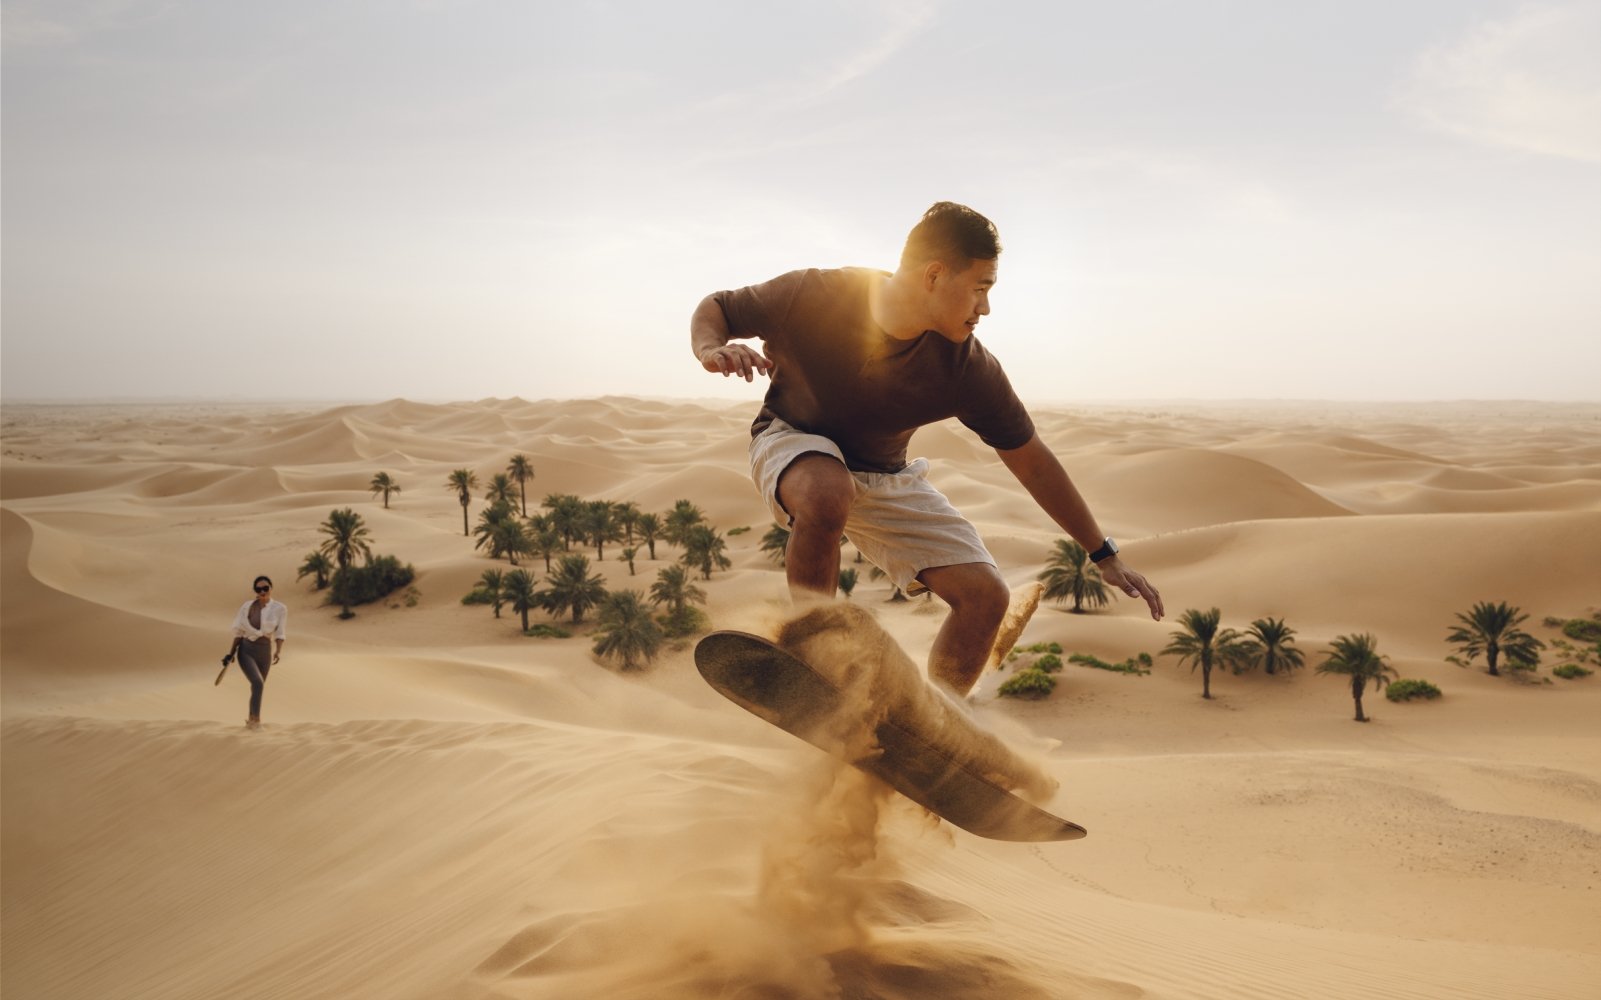 Man sandboarding on the dunes of Abu Dhabi with his wife in the background